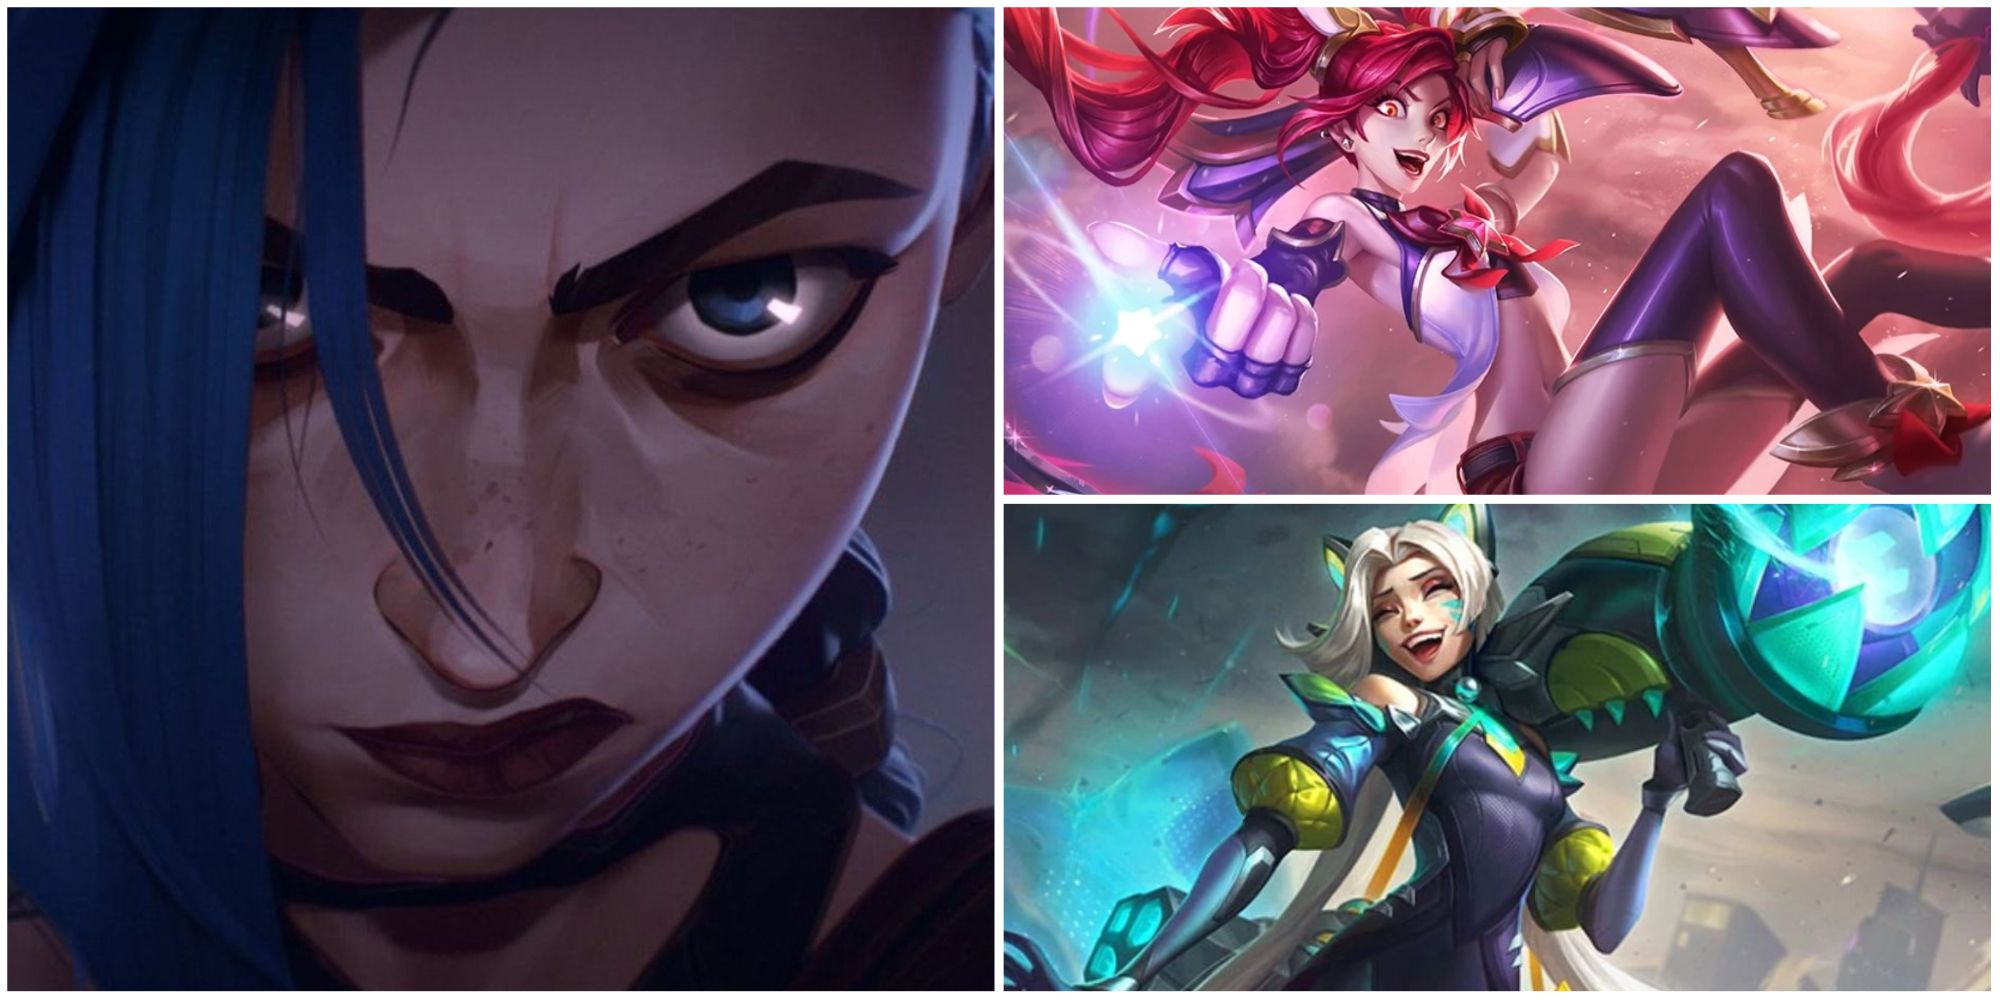 https://static0.gamerantimages.com/wordpress/wp-content/uploads/2023/01/league-of-legends-tips-for-playing-as-jinx.jpg